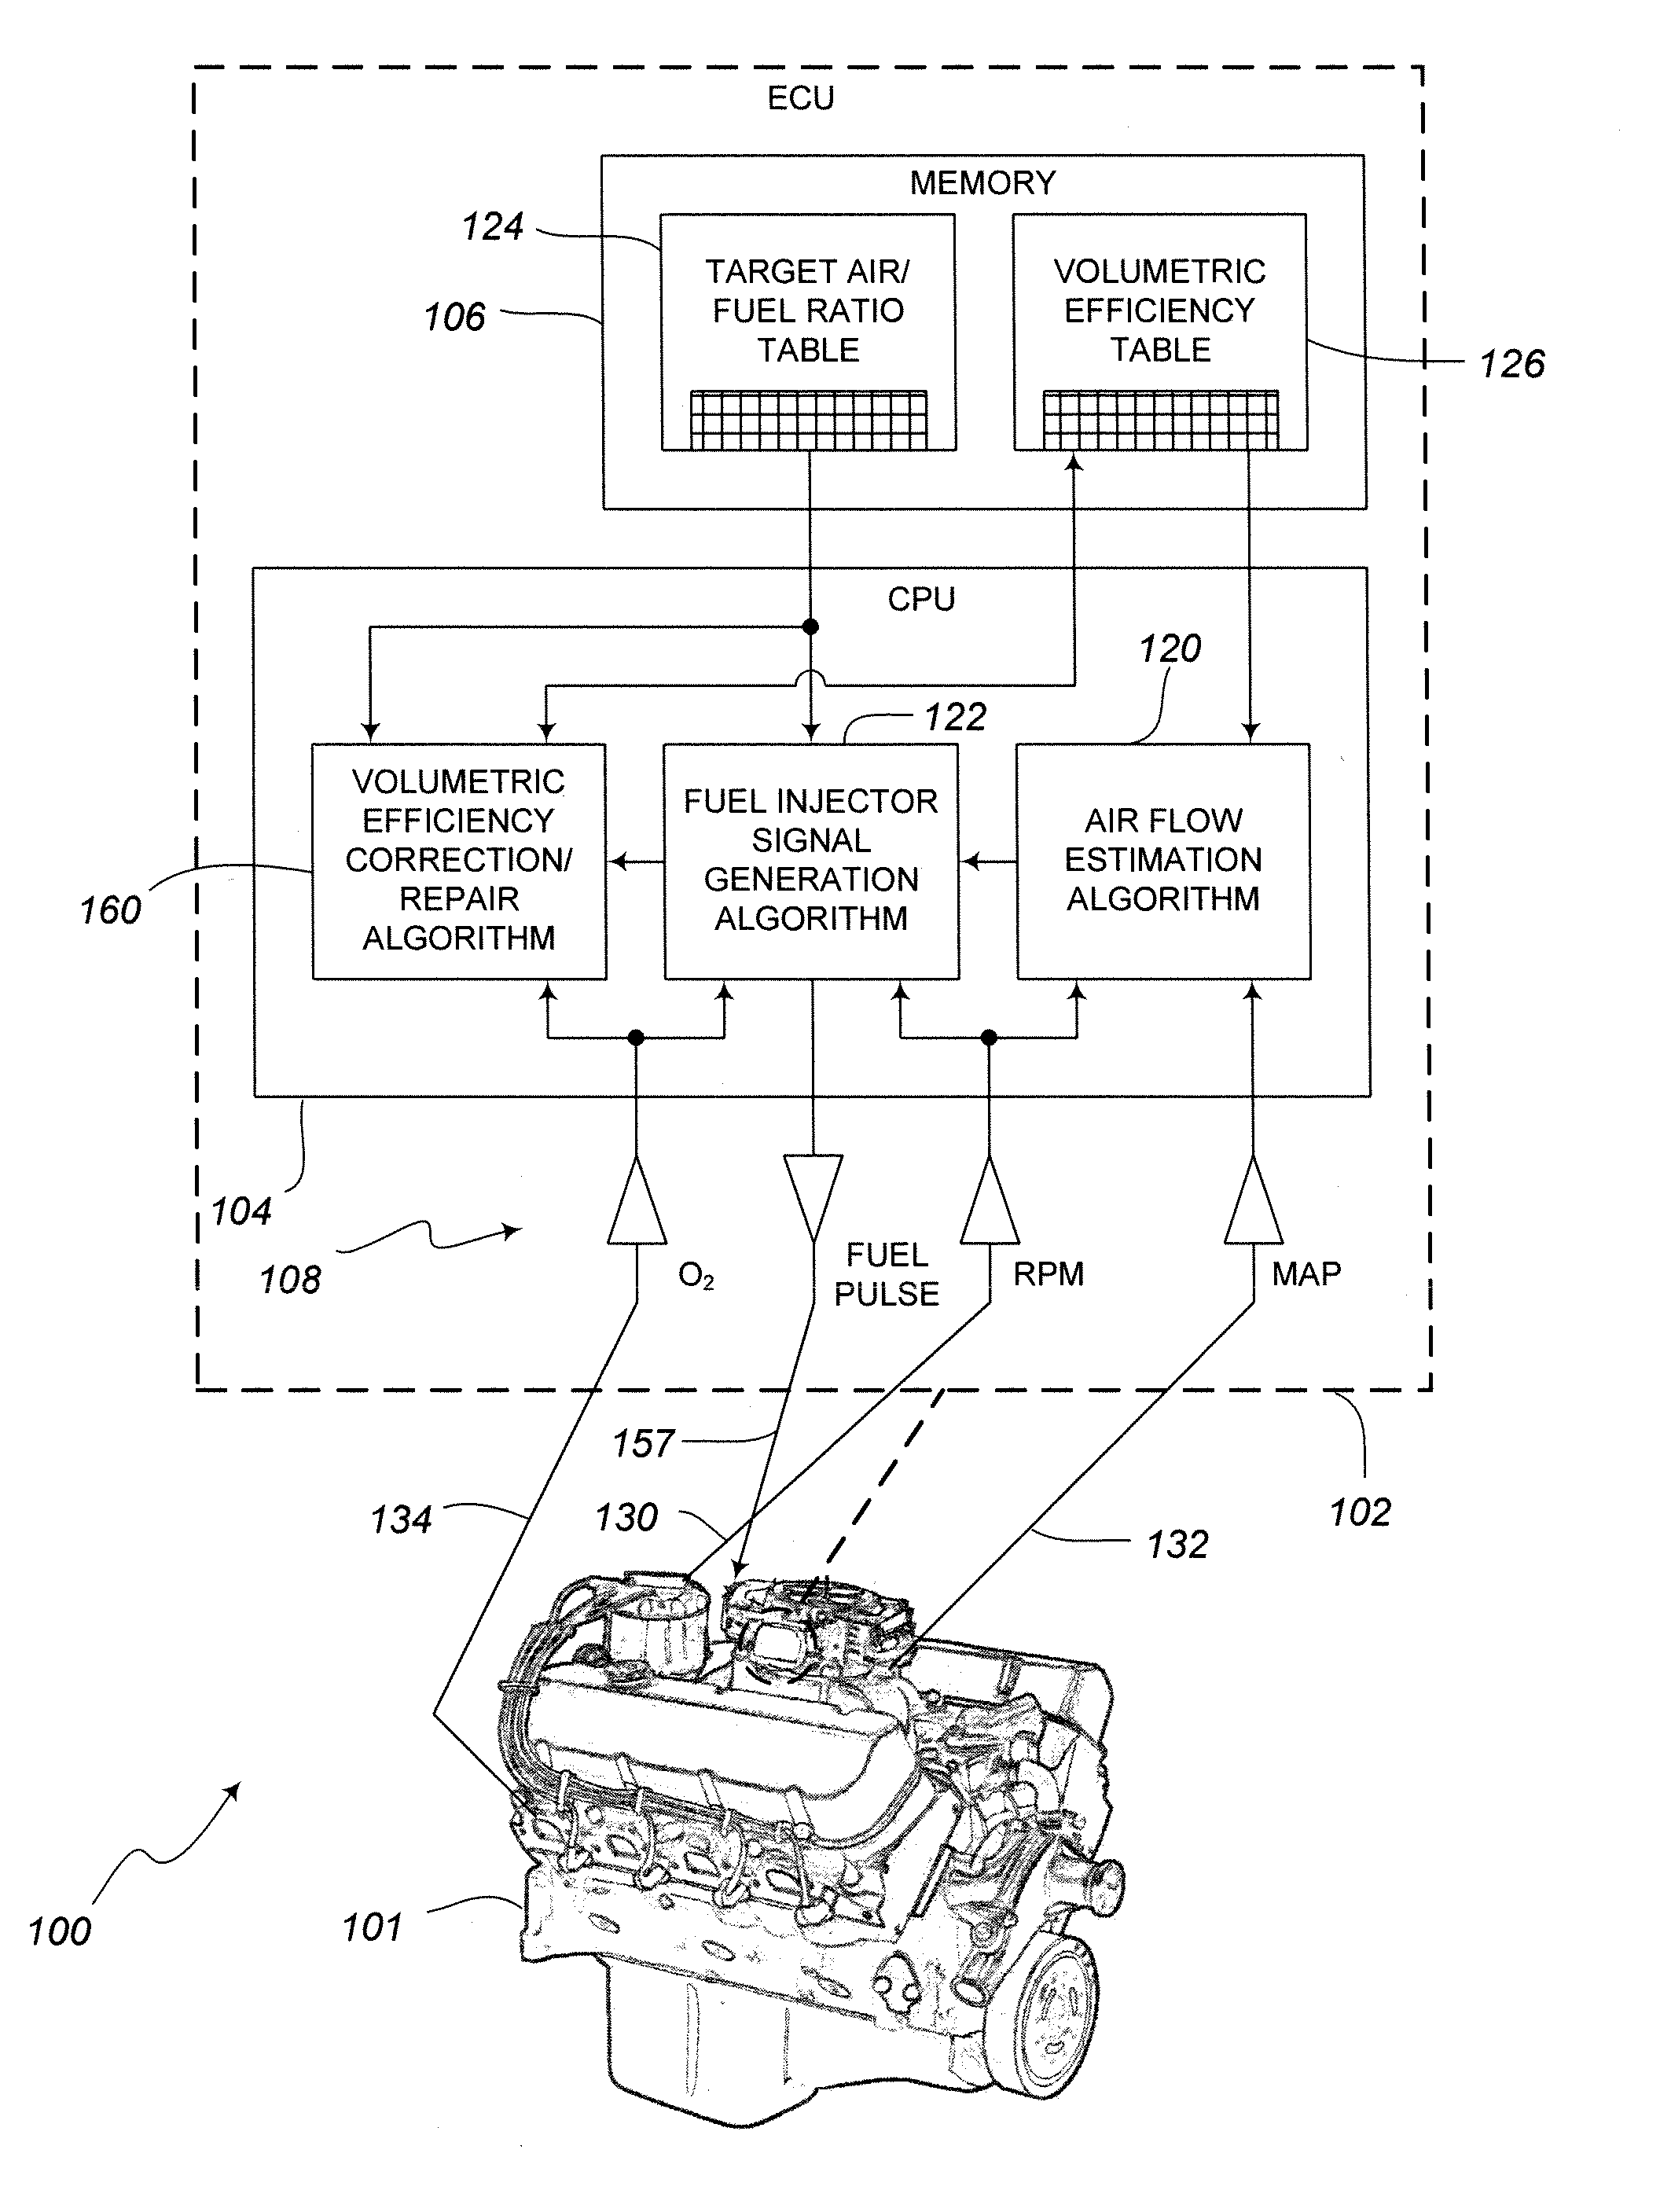 Self-tuning electronic fuel injection system